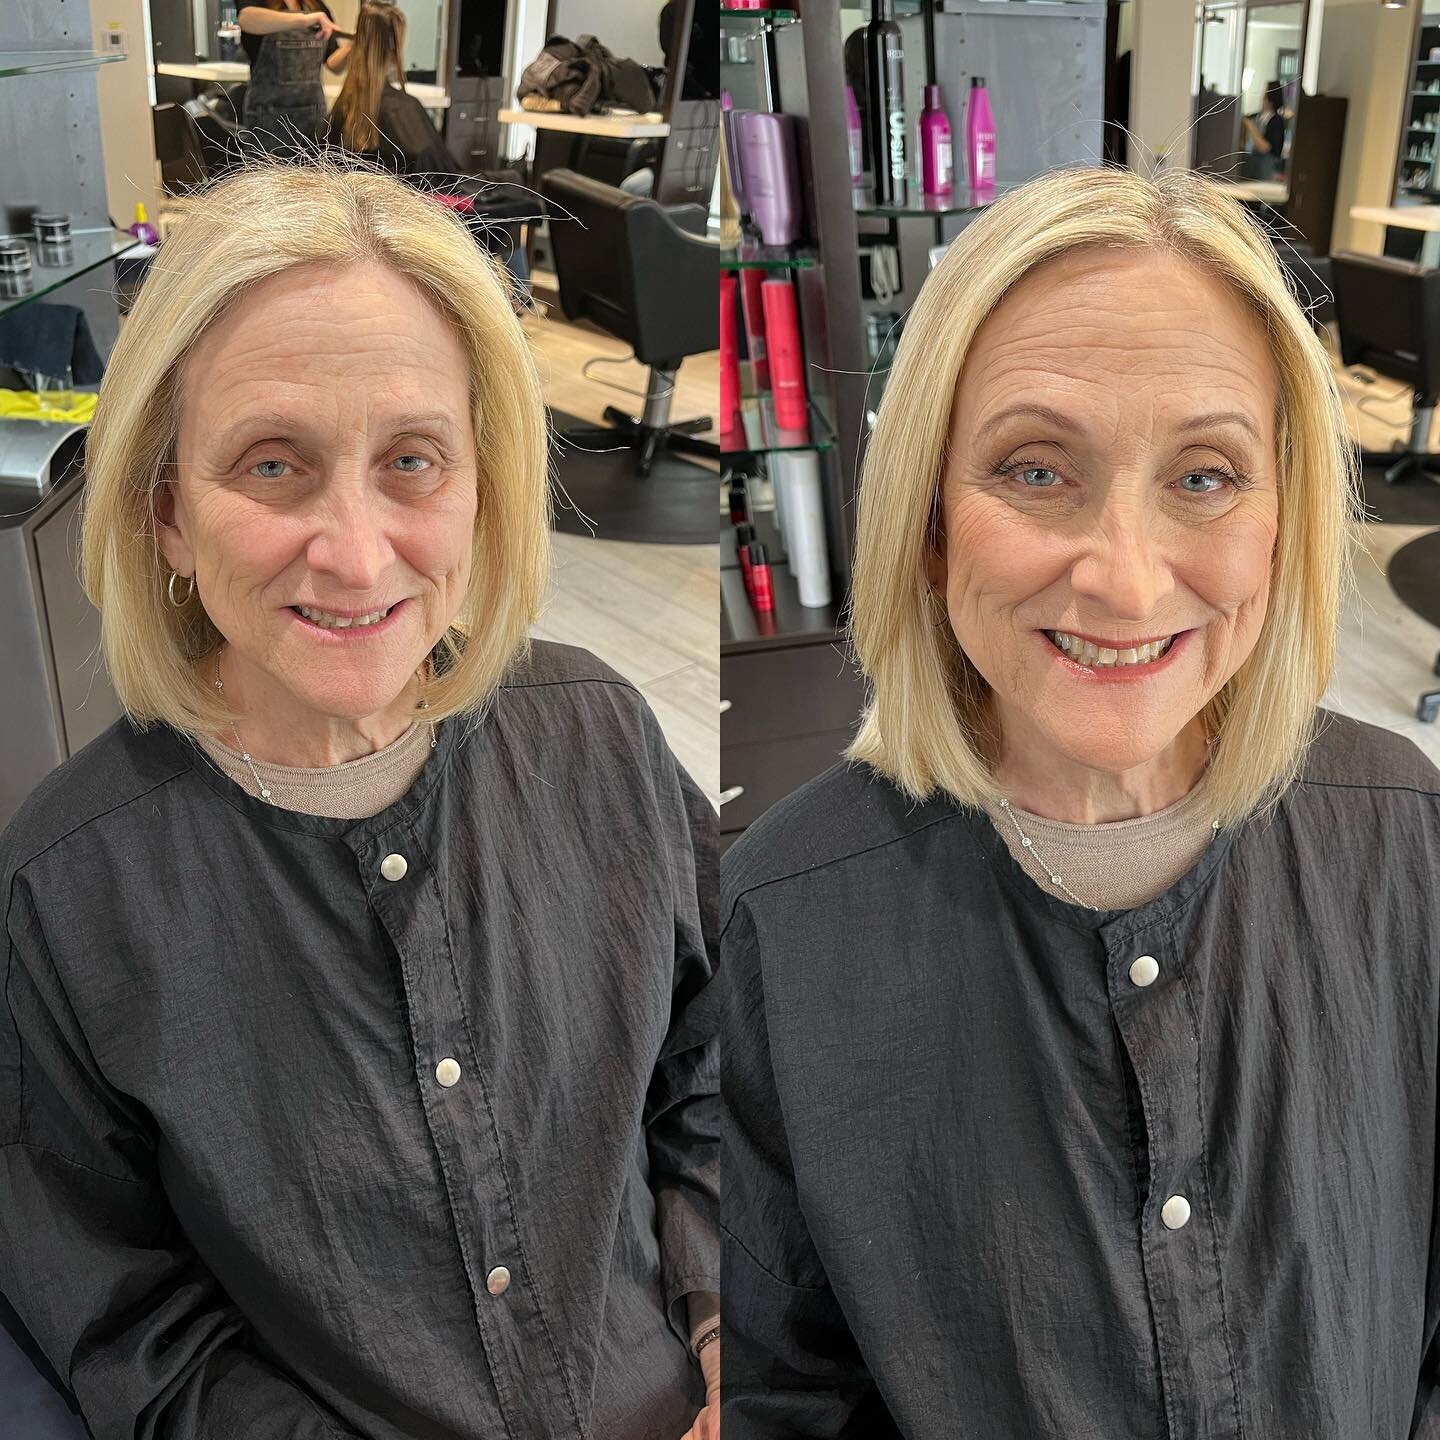 Natural Makeup &amp; A Smooth Blowdry &amp; Flat iron 🪄. 
 
By Stylist : Michelle

CALL US NOW TO BOOK YOUR APPOINTMENTS FOR ANY SPECIAL OCCASIONS COMING UP💫
(626) 577-8855

#BeforeAndAfter #NaturalMakeup #Blowout